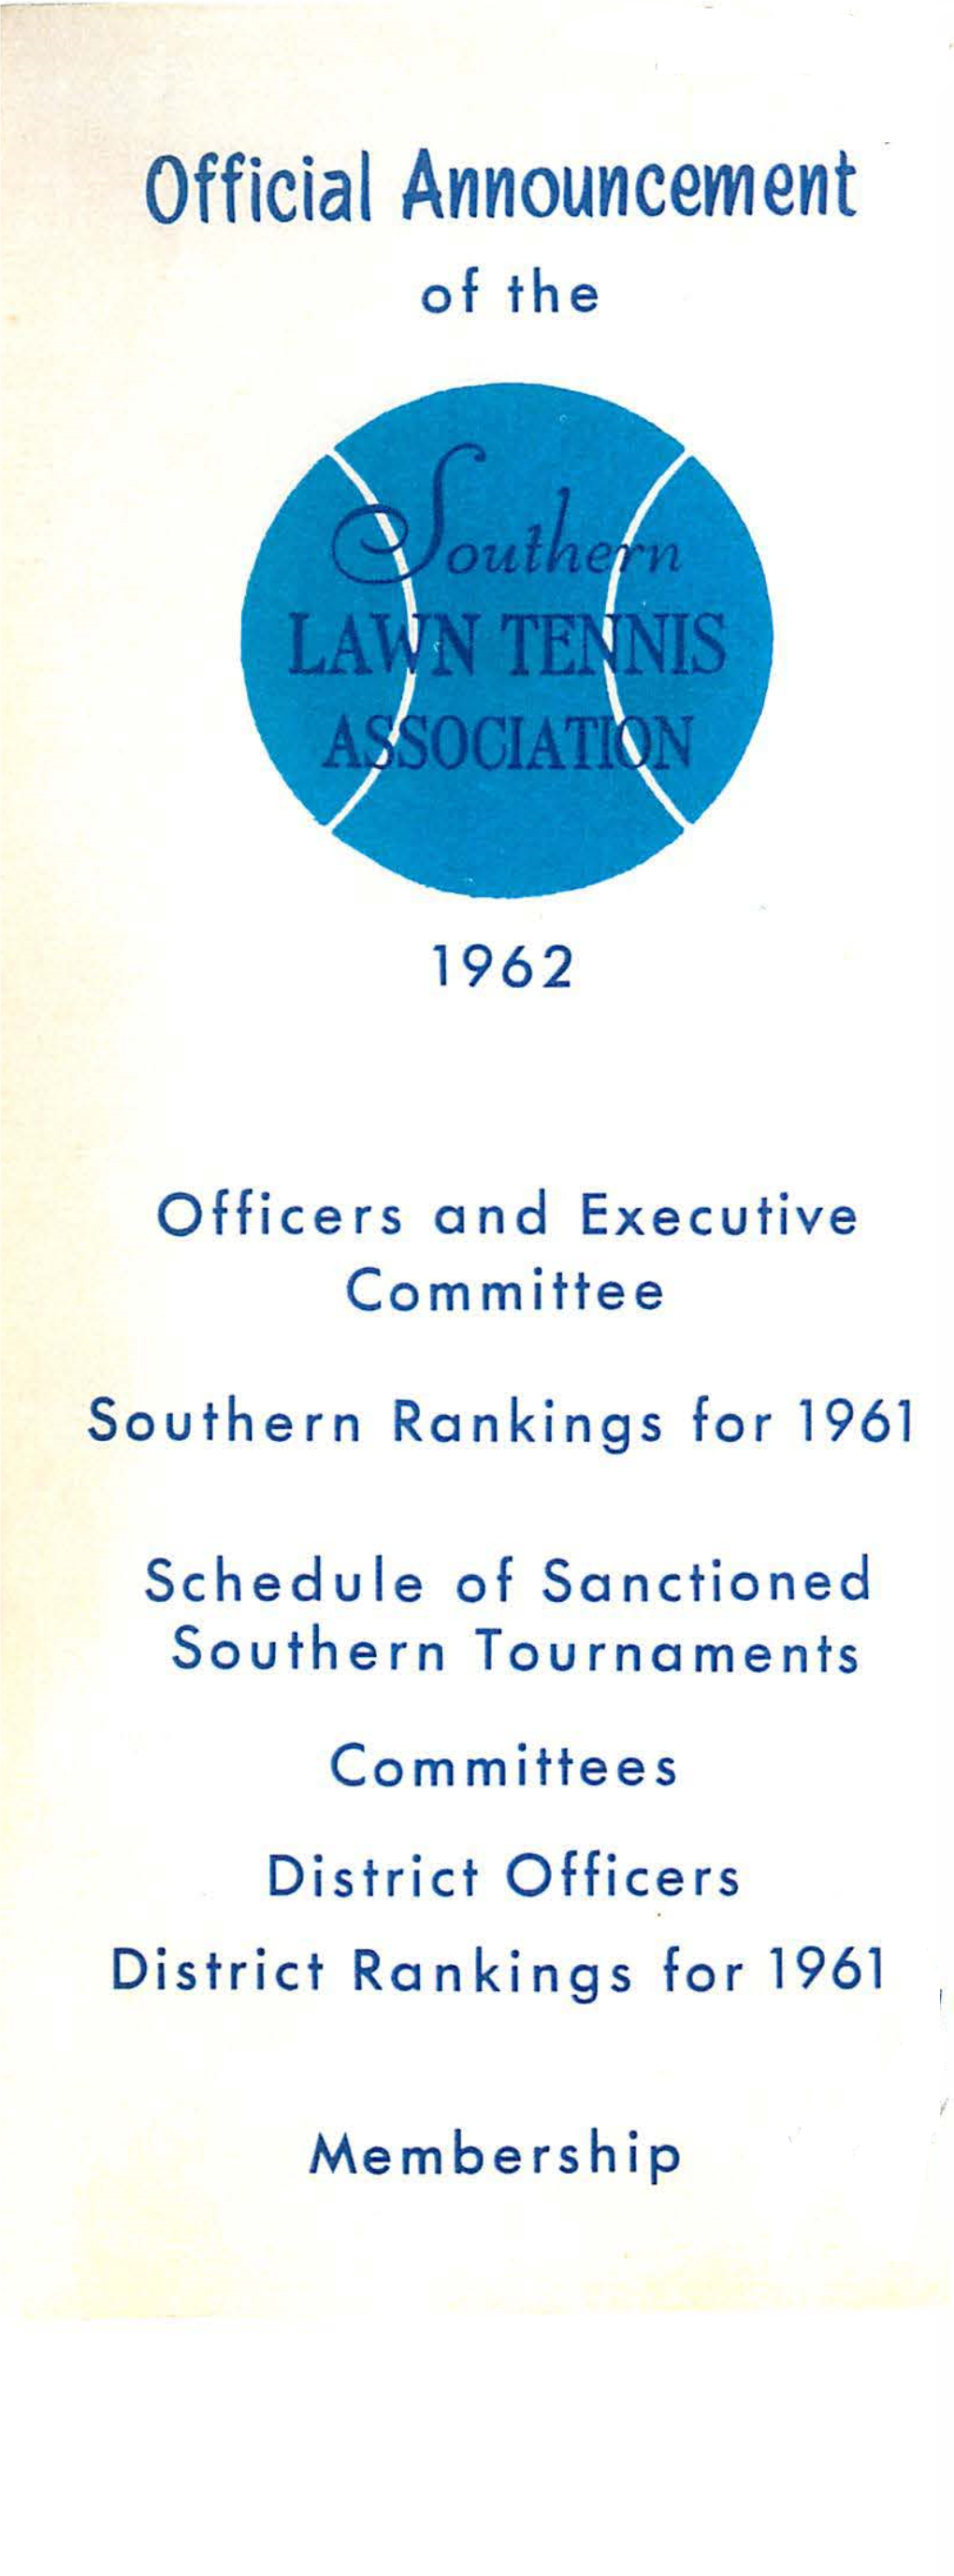 Southern Yearbook 1962 Info